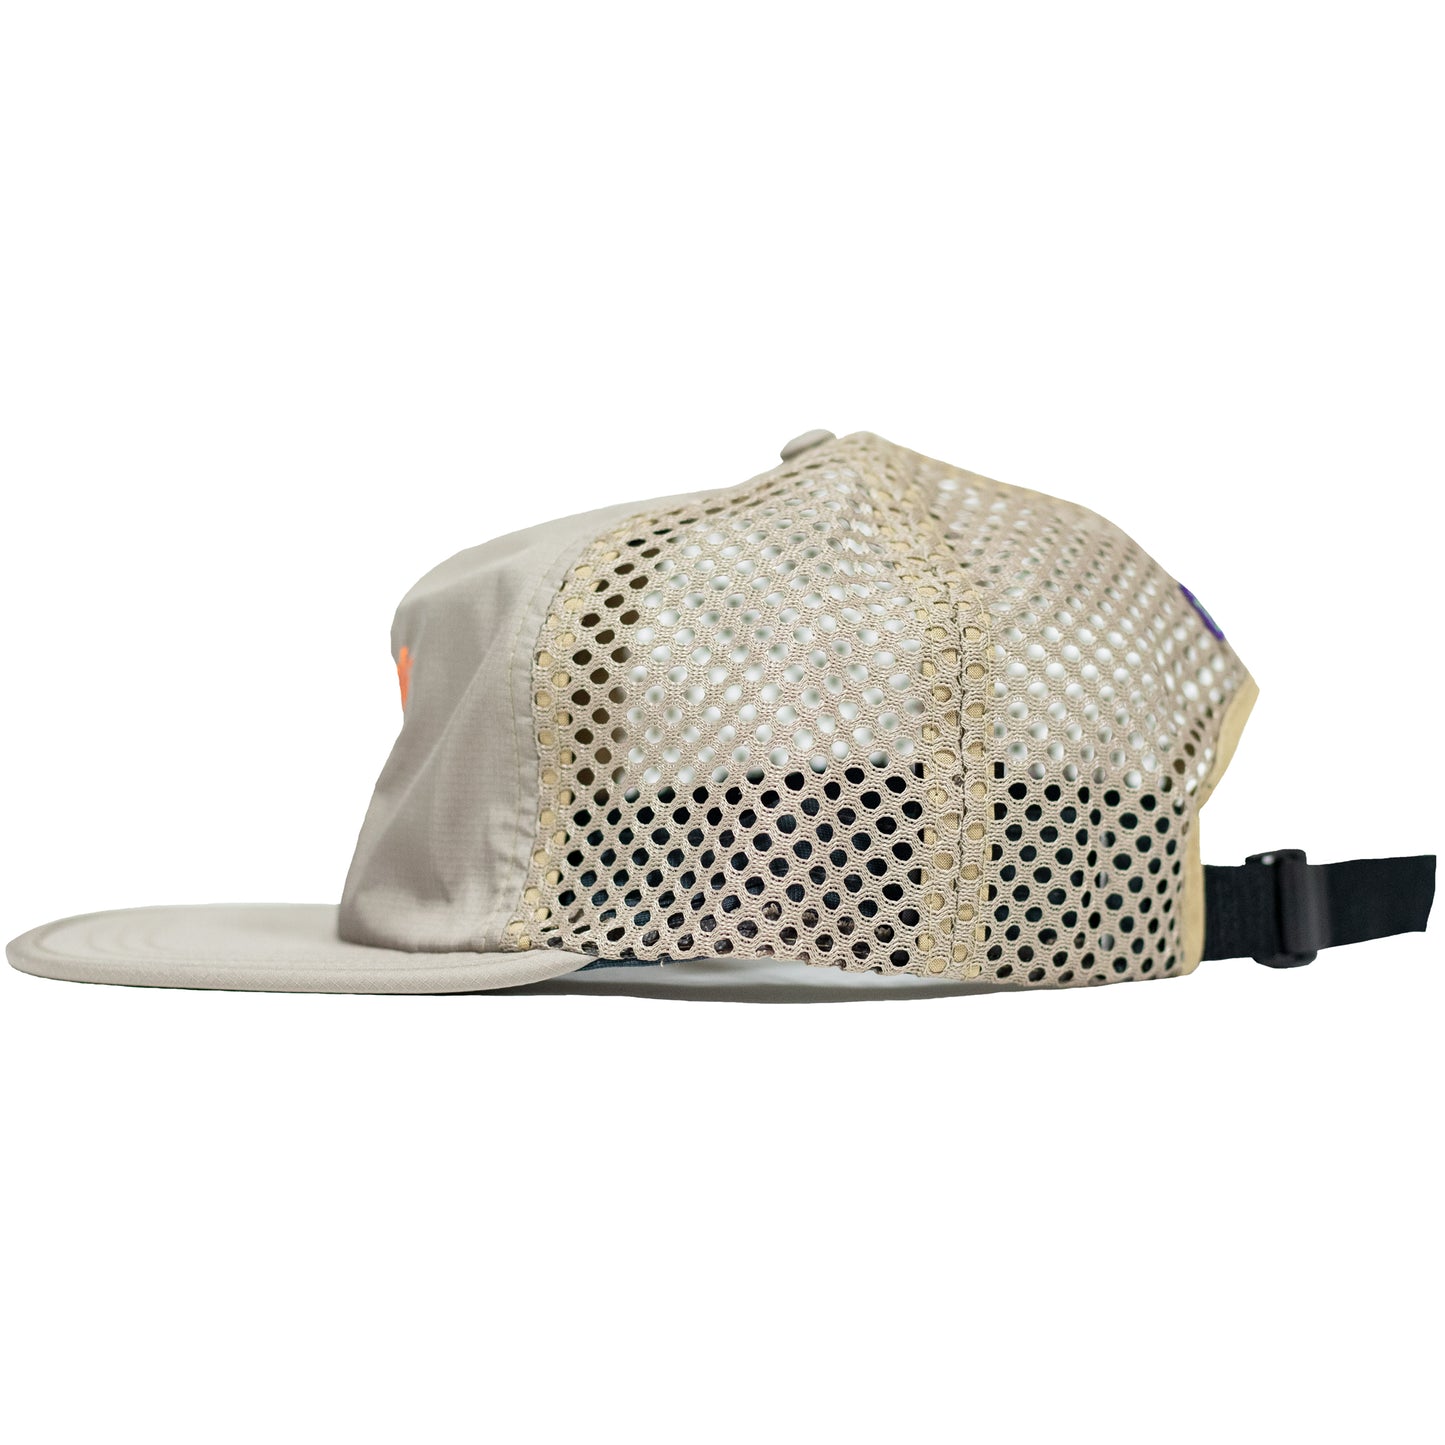 Loud Day Hat - Sand/Sand